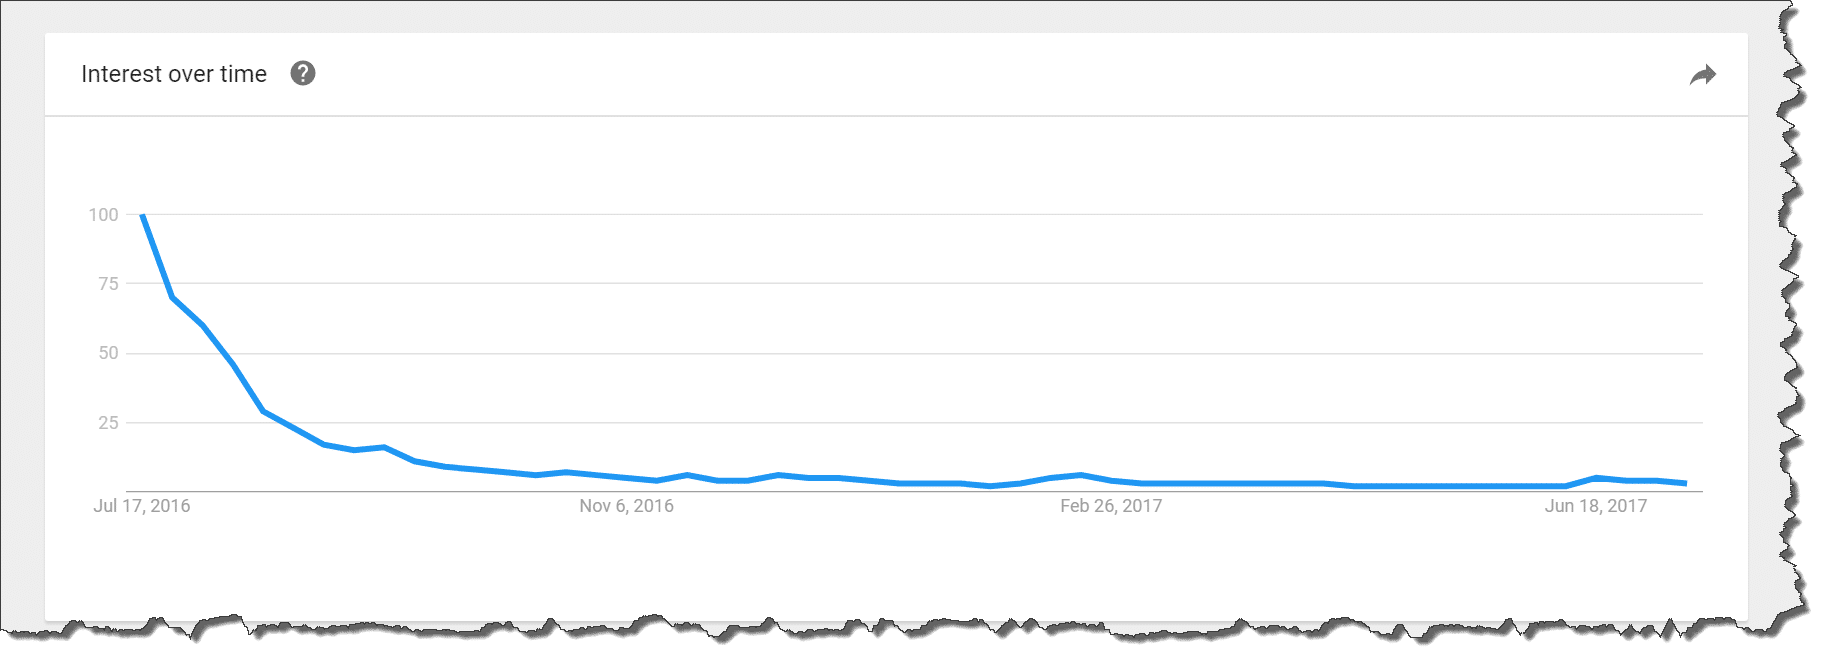 Image about interest over time in Google Trends